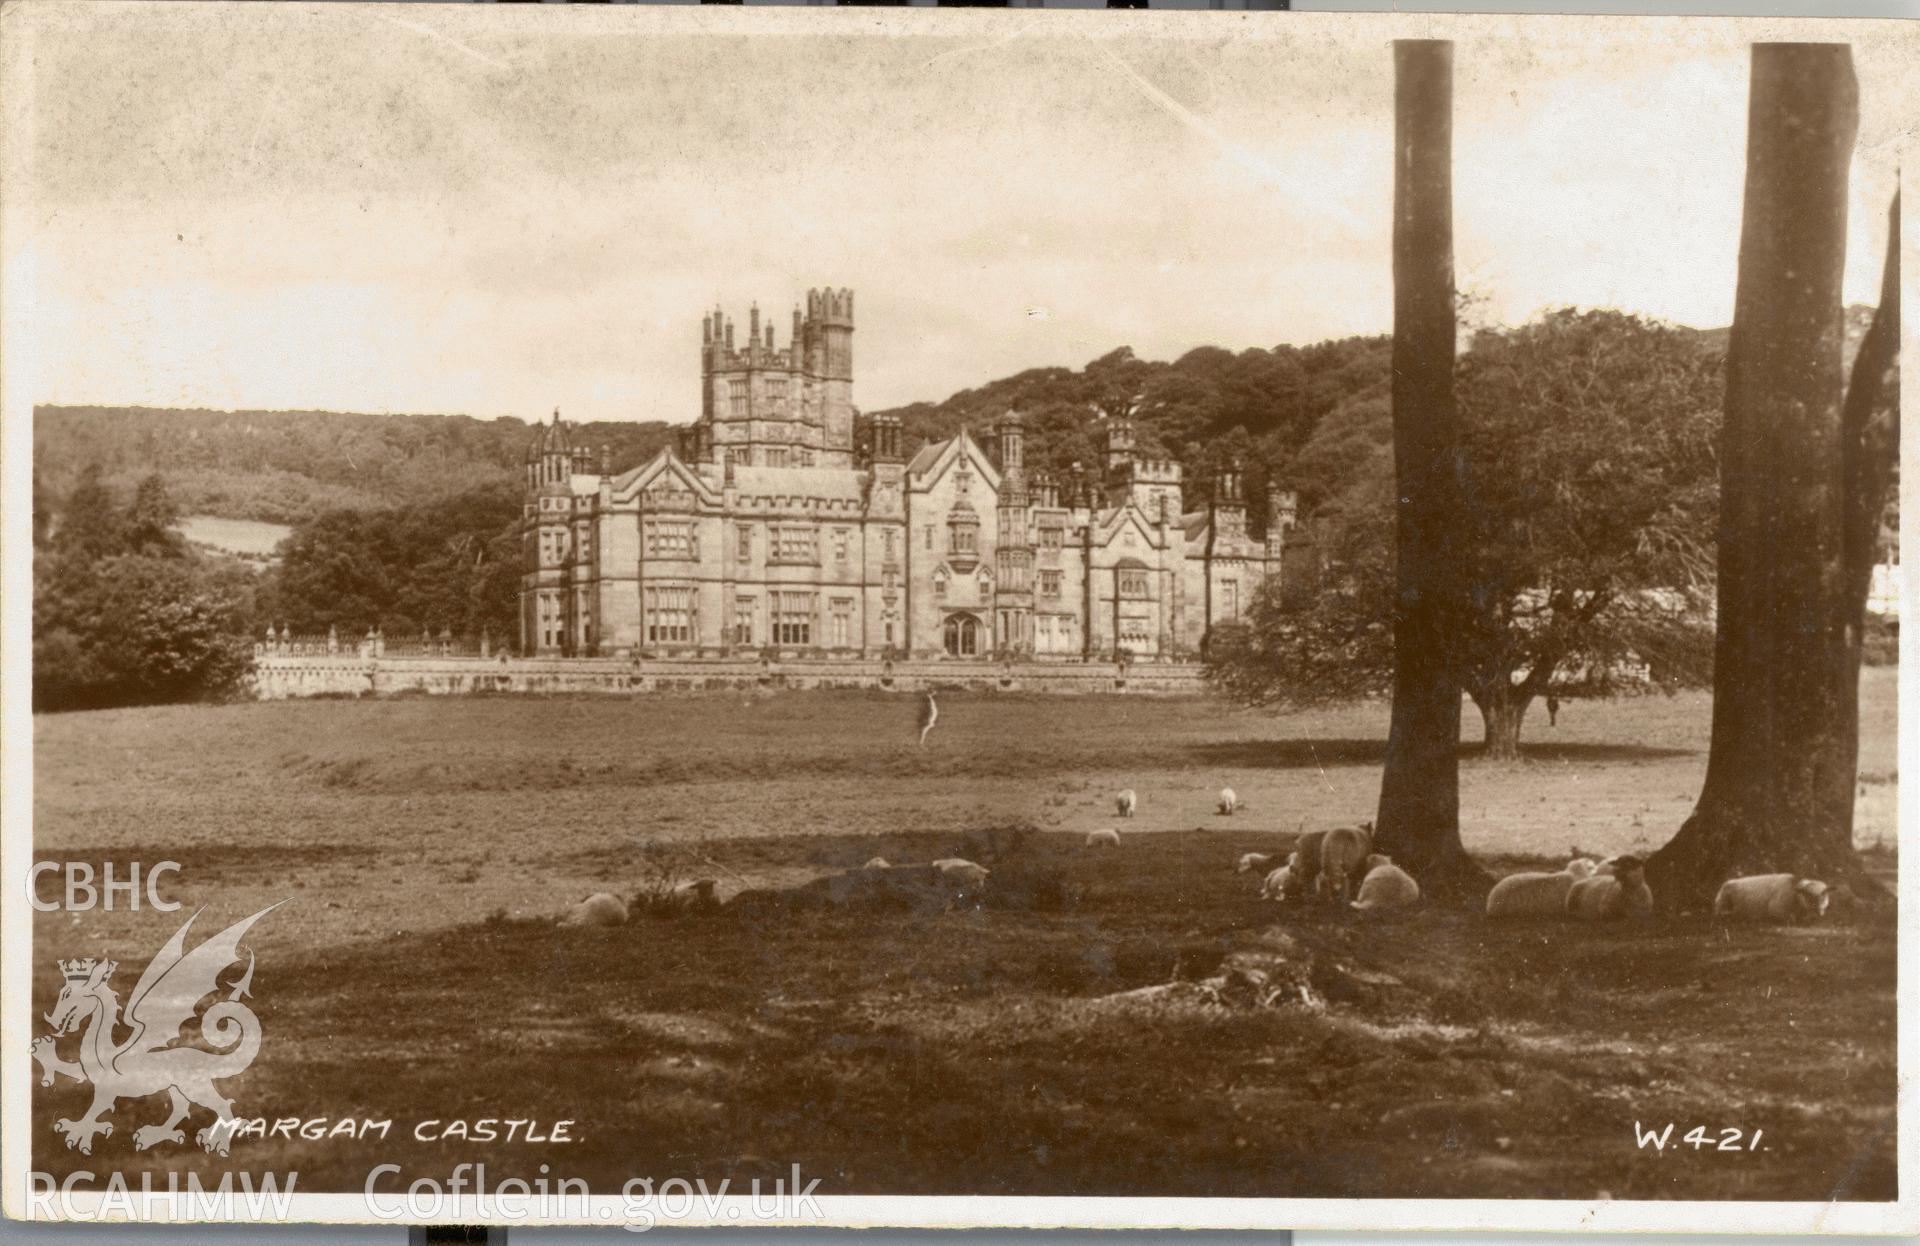 Digitised postcard image of Margam Castle, Valentines & Sons Ltd. Produced by Parks and Gardens Data Services, from an original item in the Peter Davis Collection at Parks and Gardens UK. We hold only web-resolution images of this collection, suitable for viewing on screen and for research purposes only. We do not hold the original images, or publication quality scans.